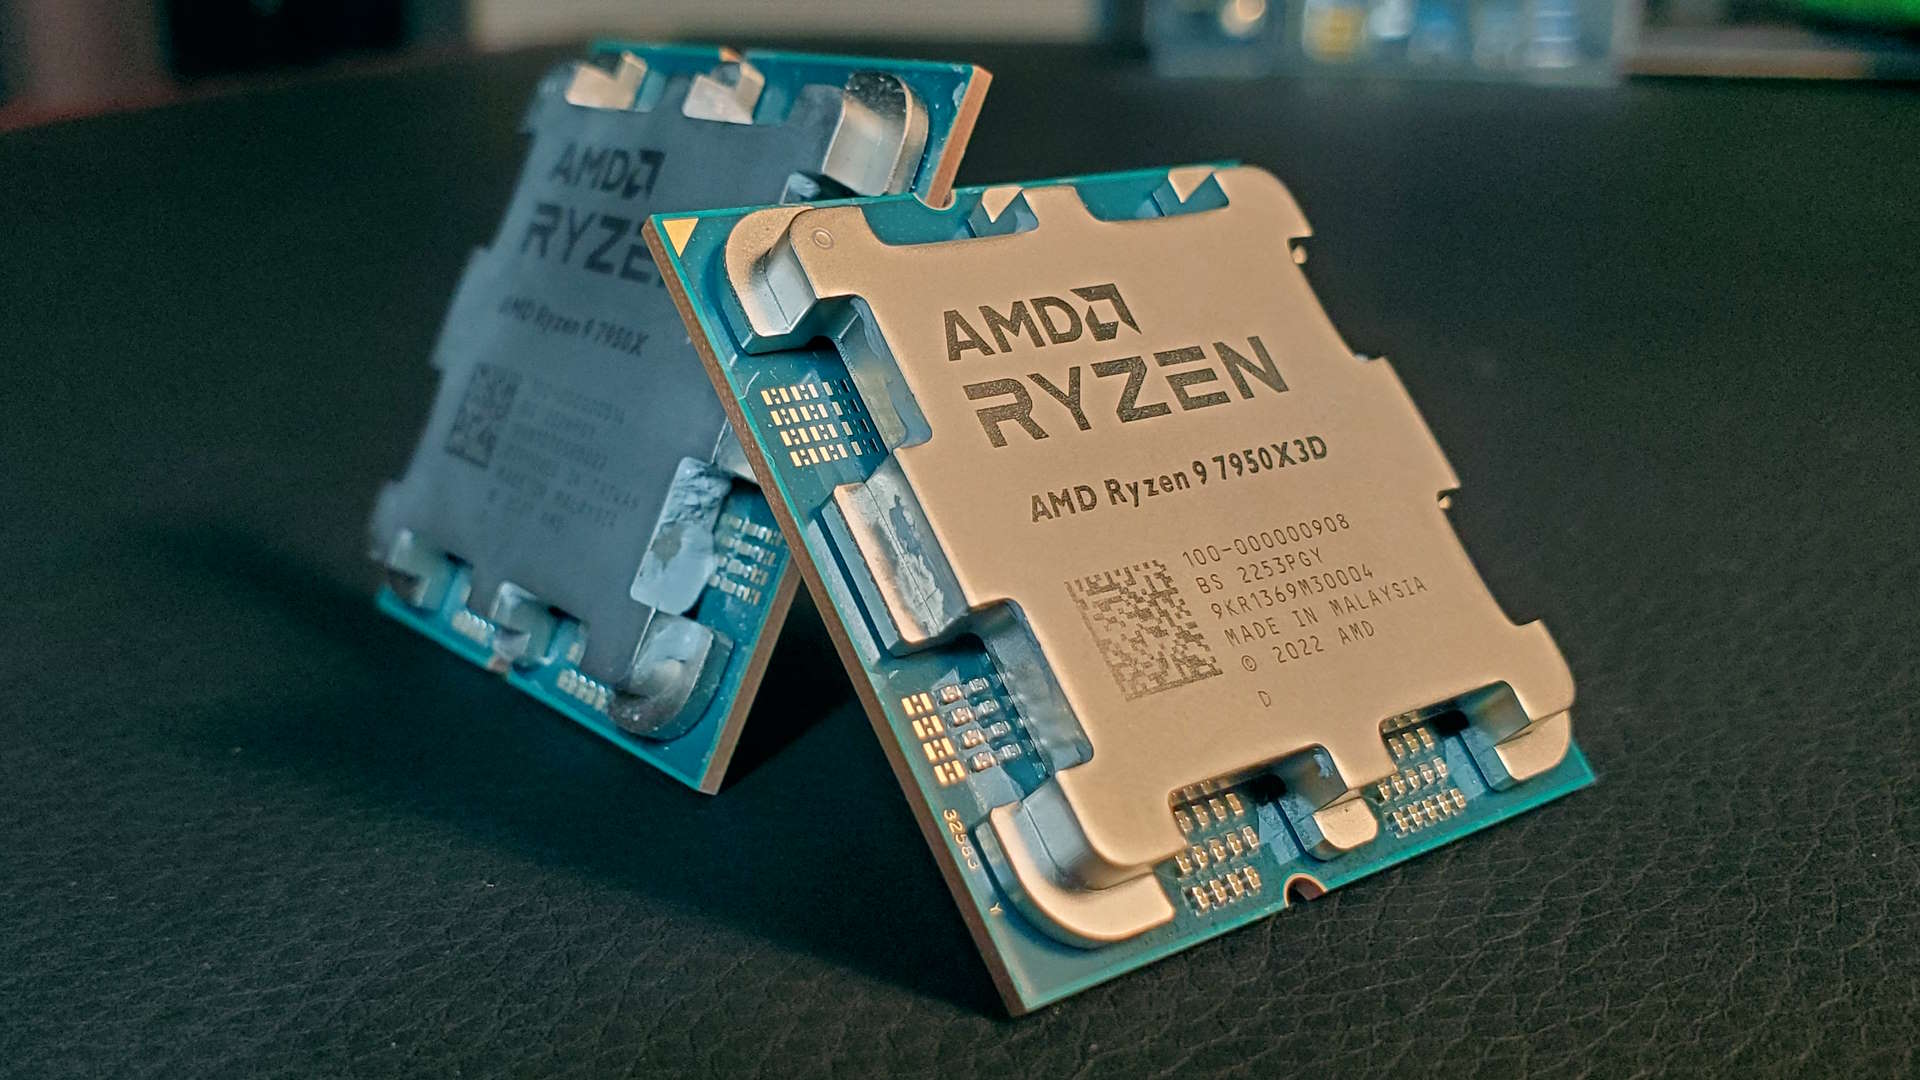  All recent AMD CPUs are affected by the 'Inception' vulnerability 